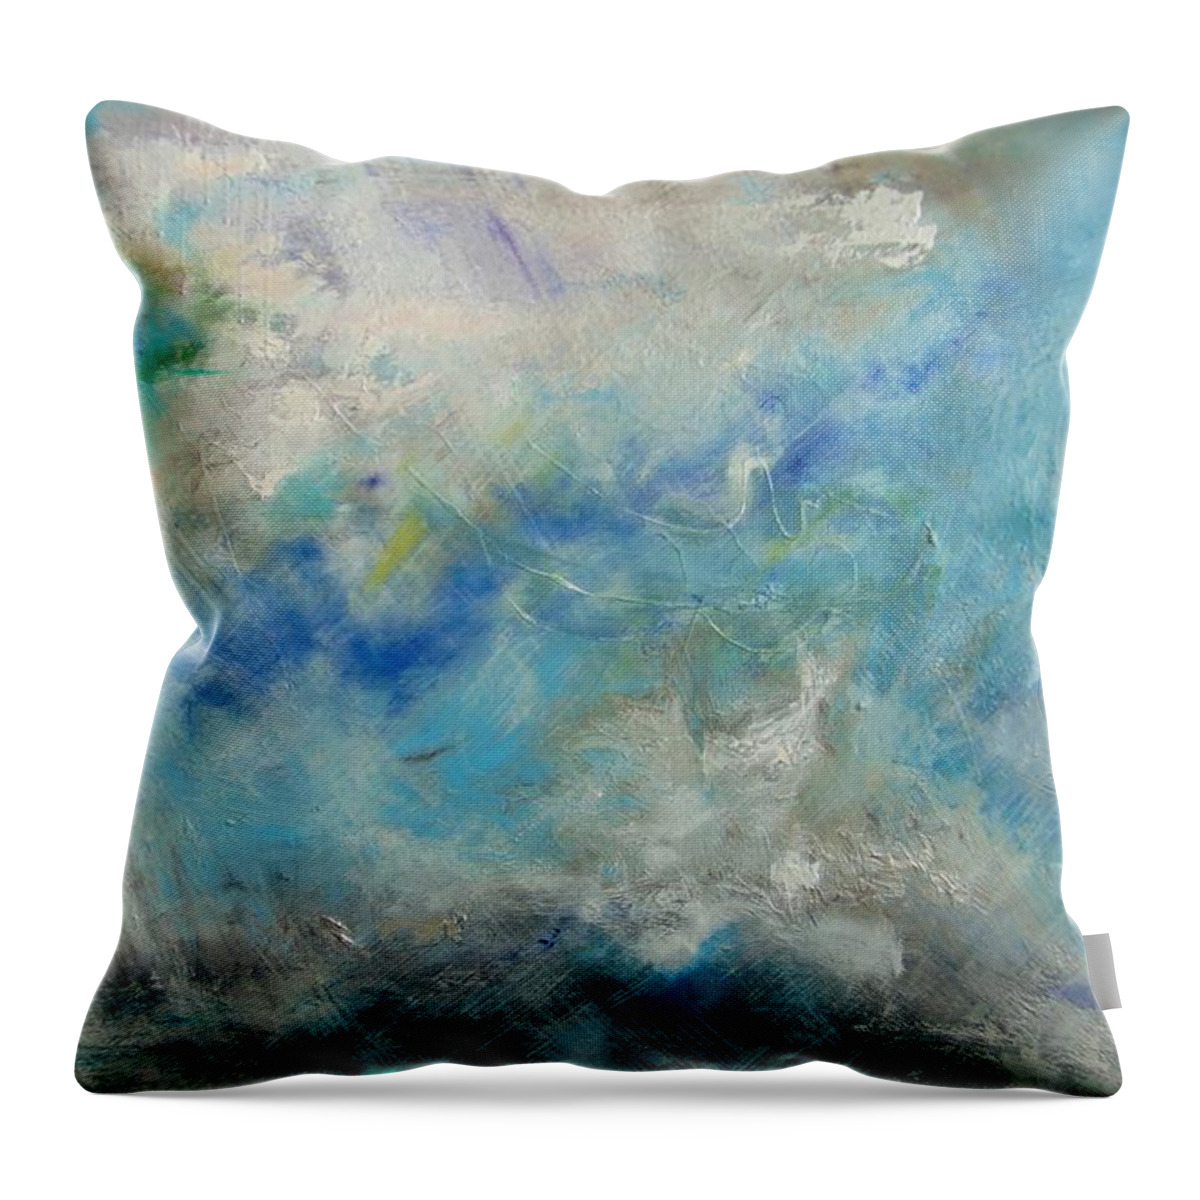 Abstract Throw Pillow featuring the painting Another vortex by Frederic Payet